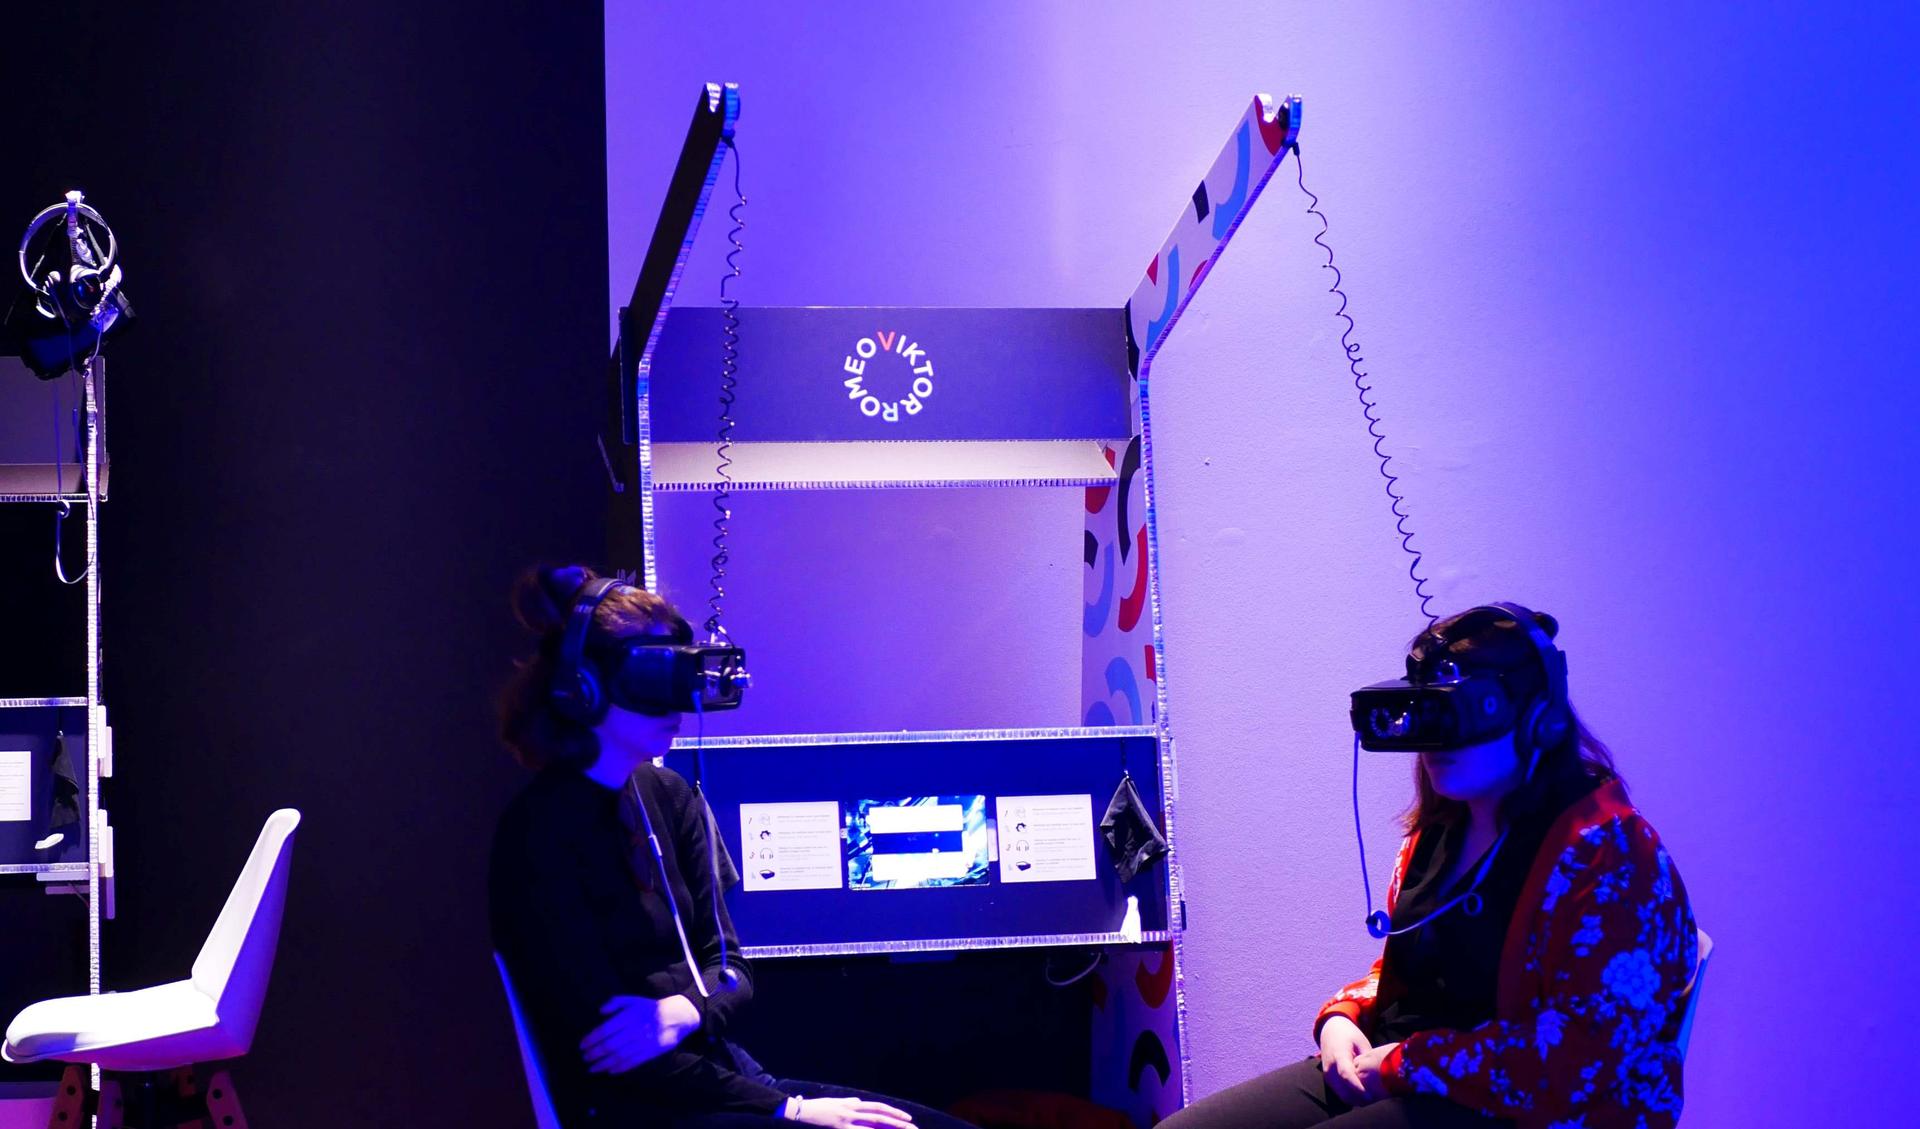 Two people sitting in a room with VR-headsets